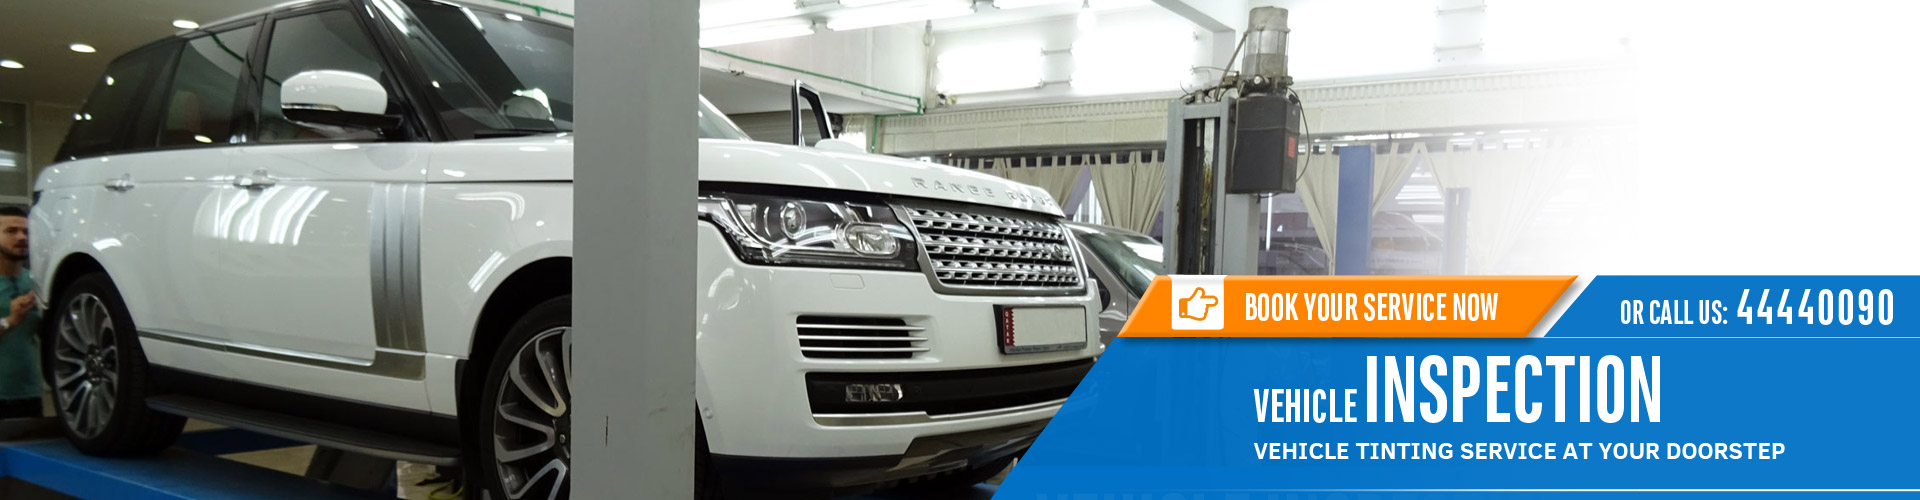 Vehicle Inspection Services in Qatar